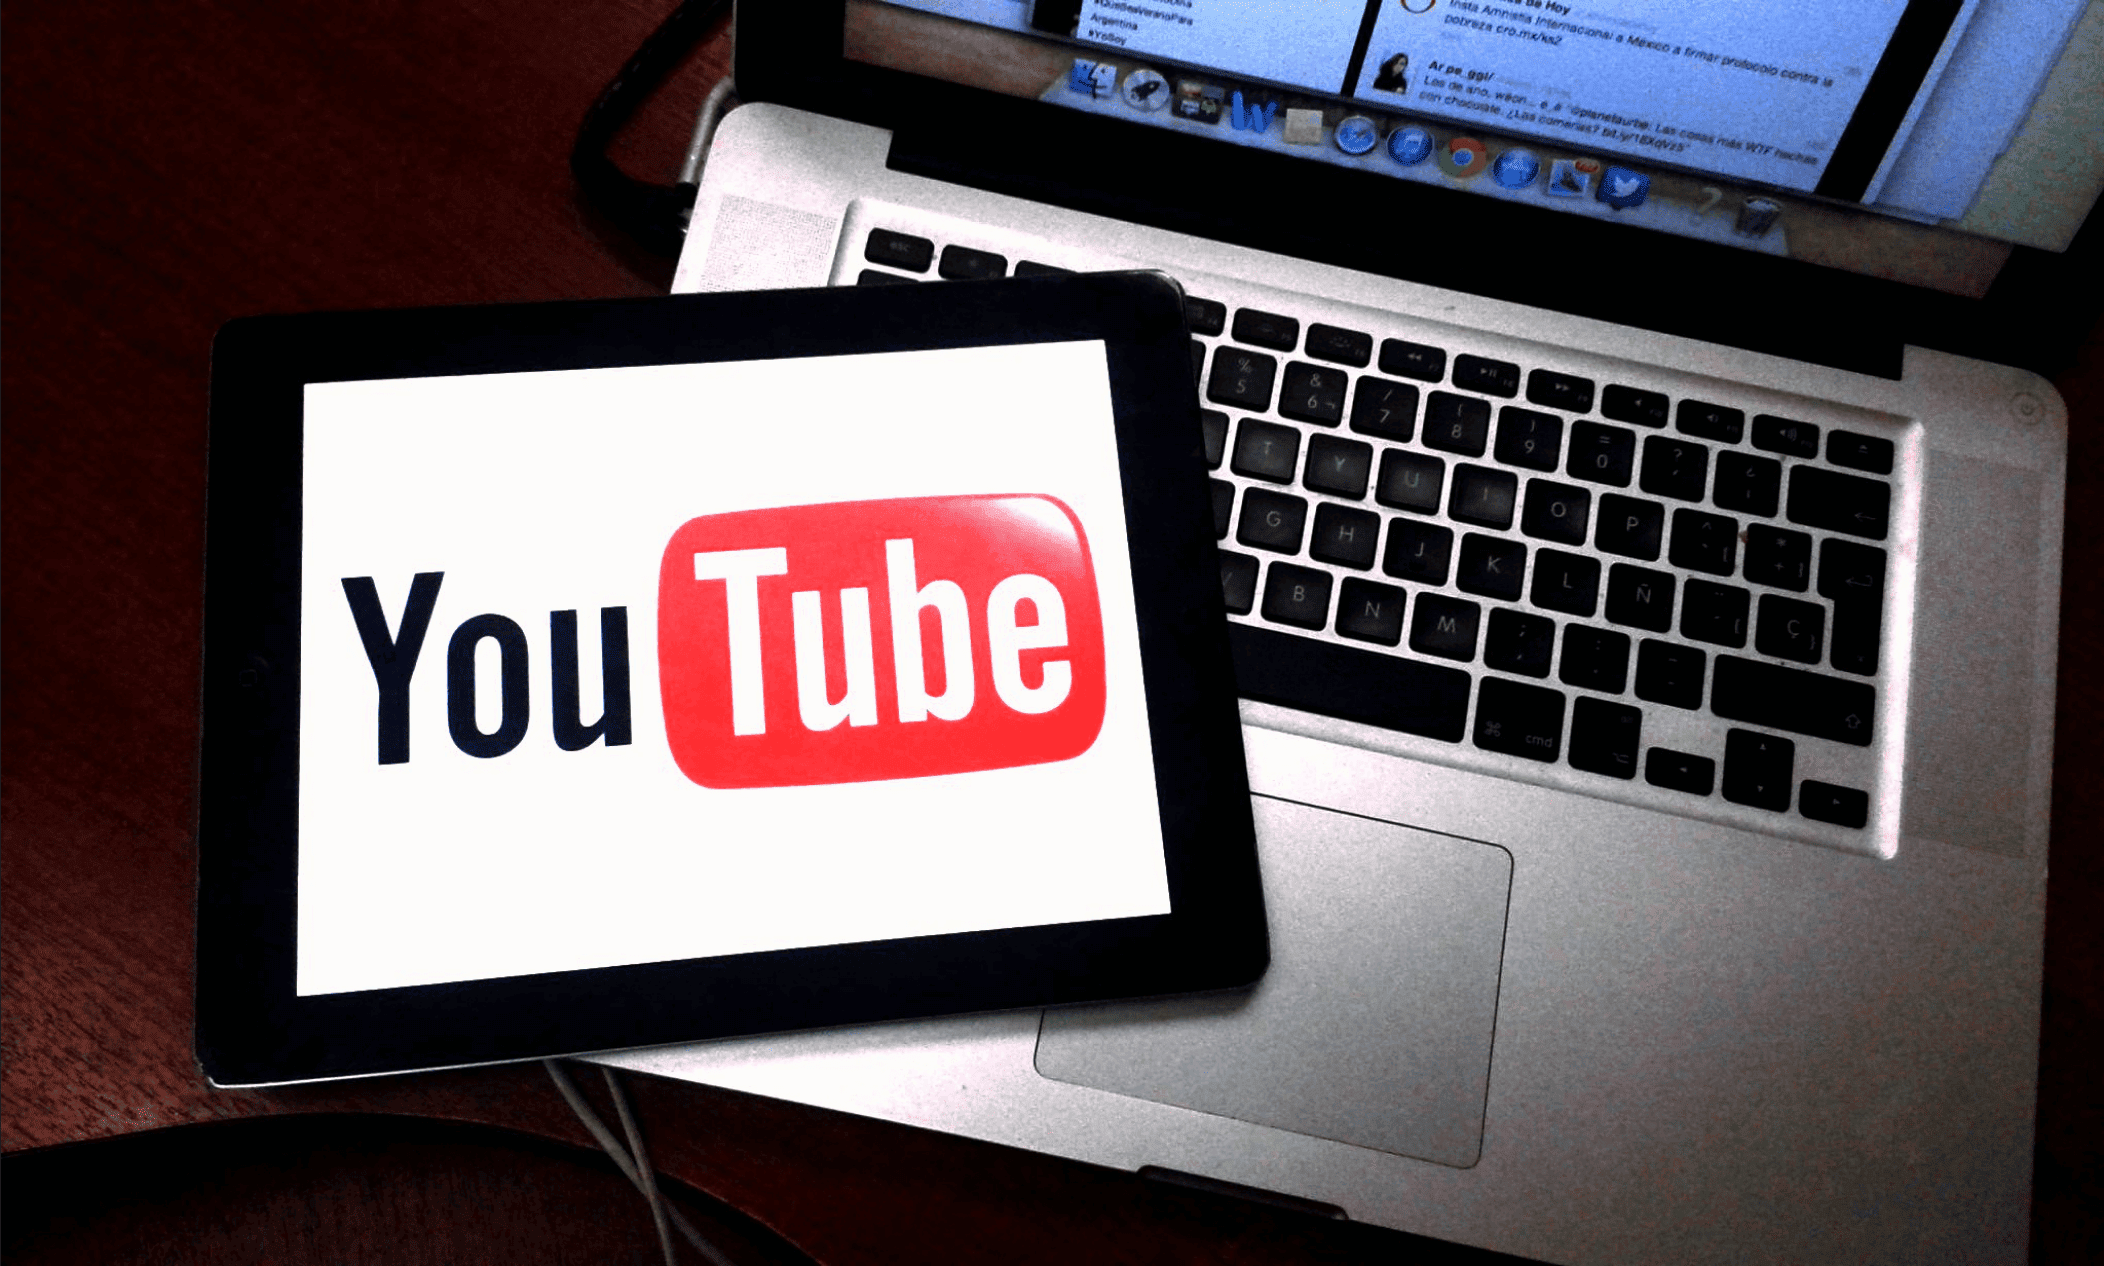 YouTube and Universal Music Group partner up to develop AI tools